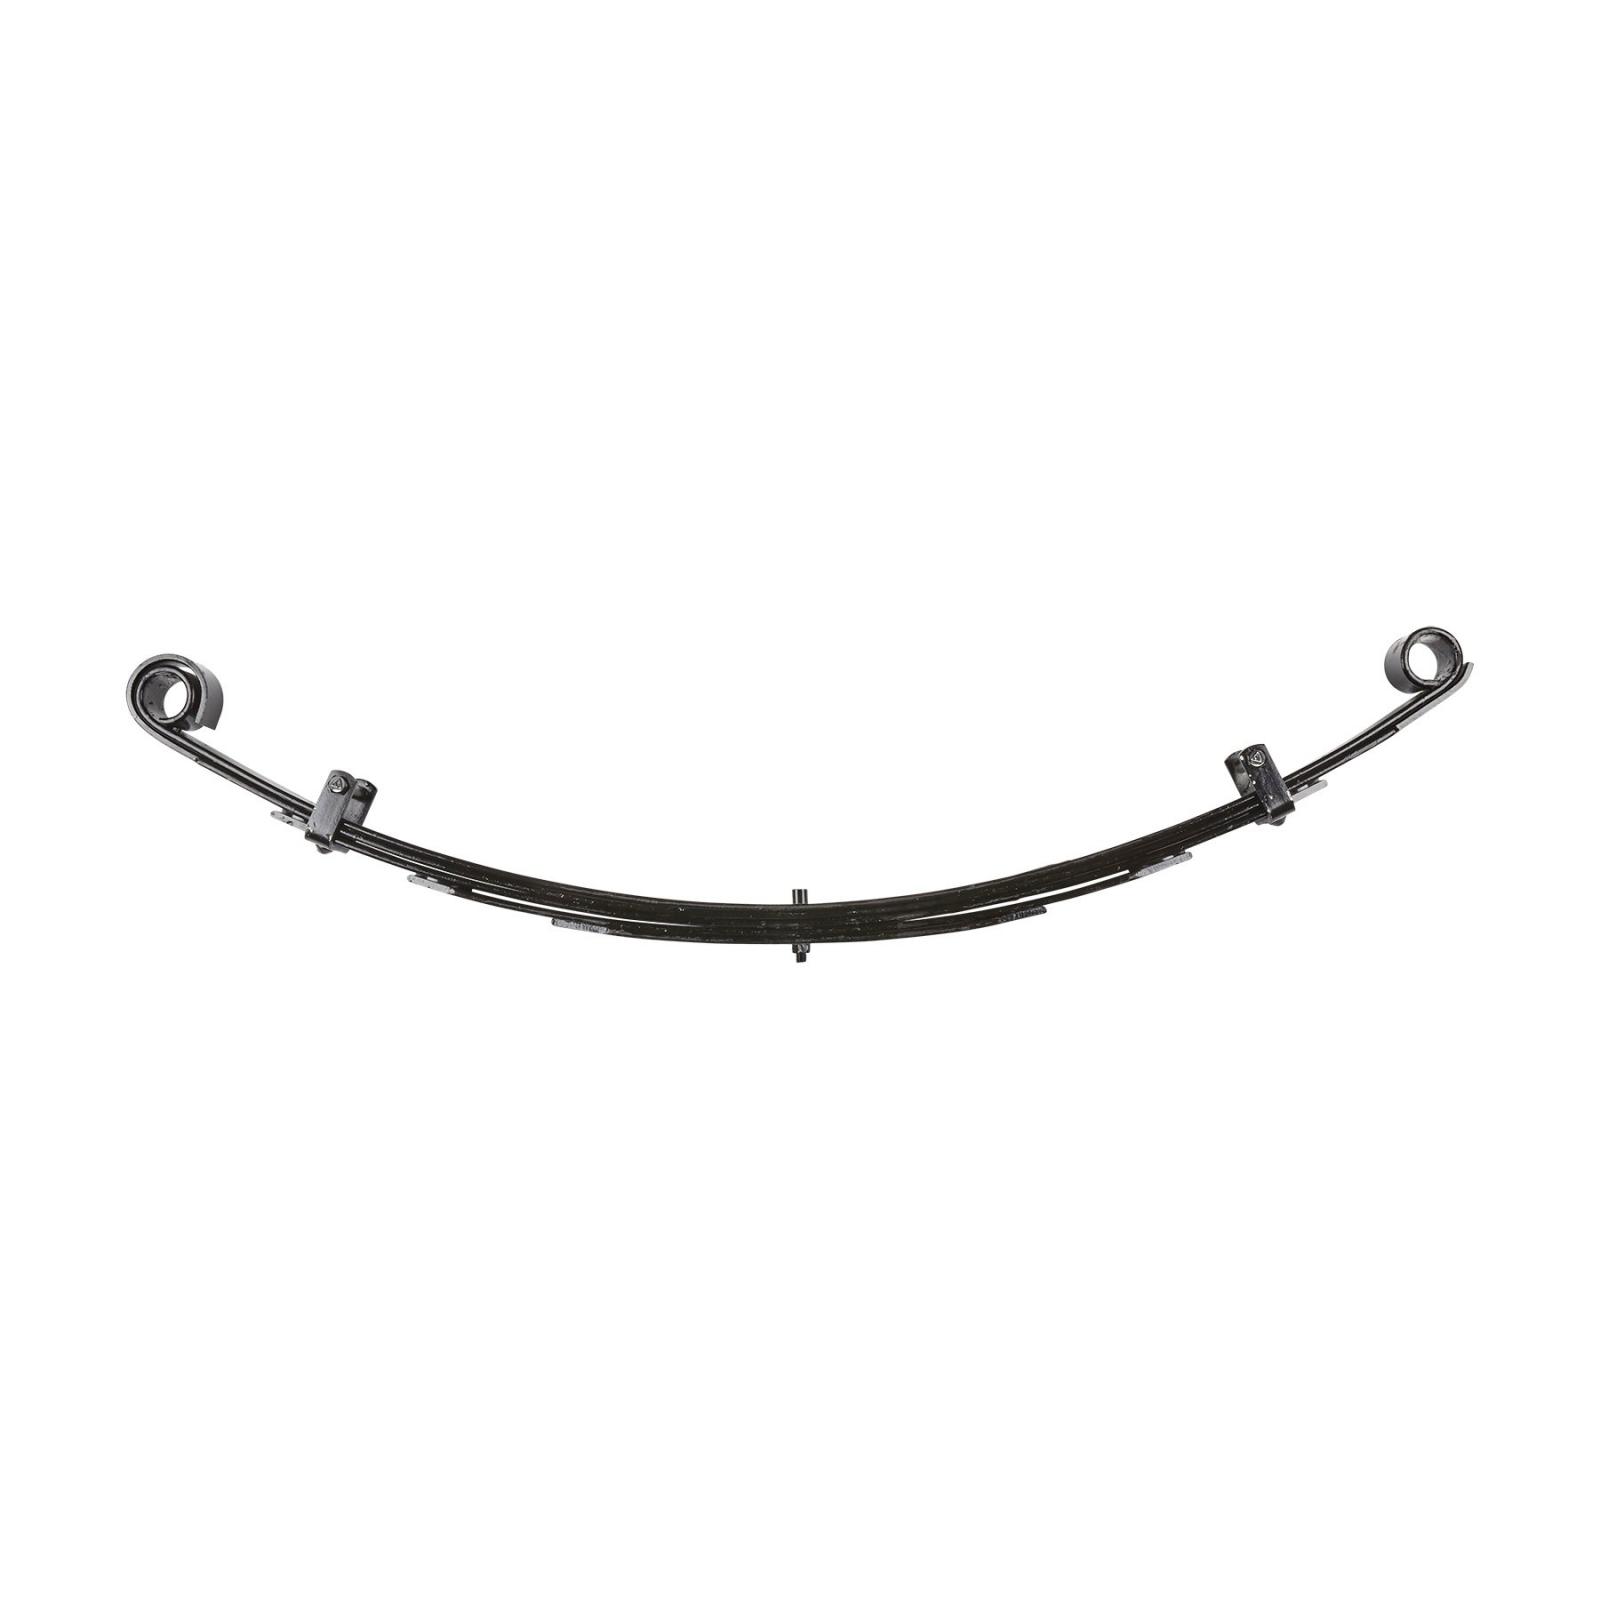 Rubicon Express YJ Front/Rear Leaf Spring 2.5 Inch Front/Rear 87-95 Wrangler YJ 